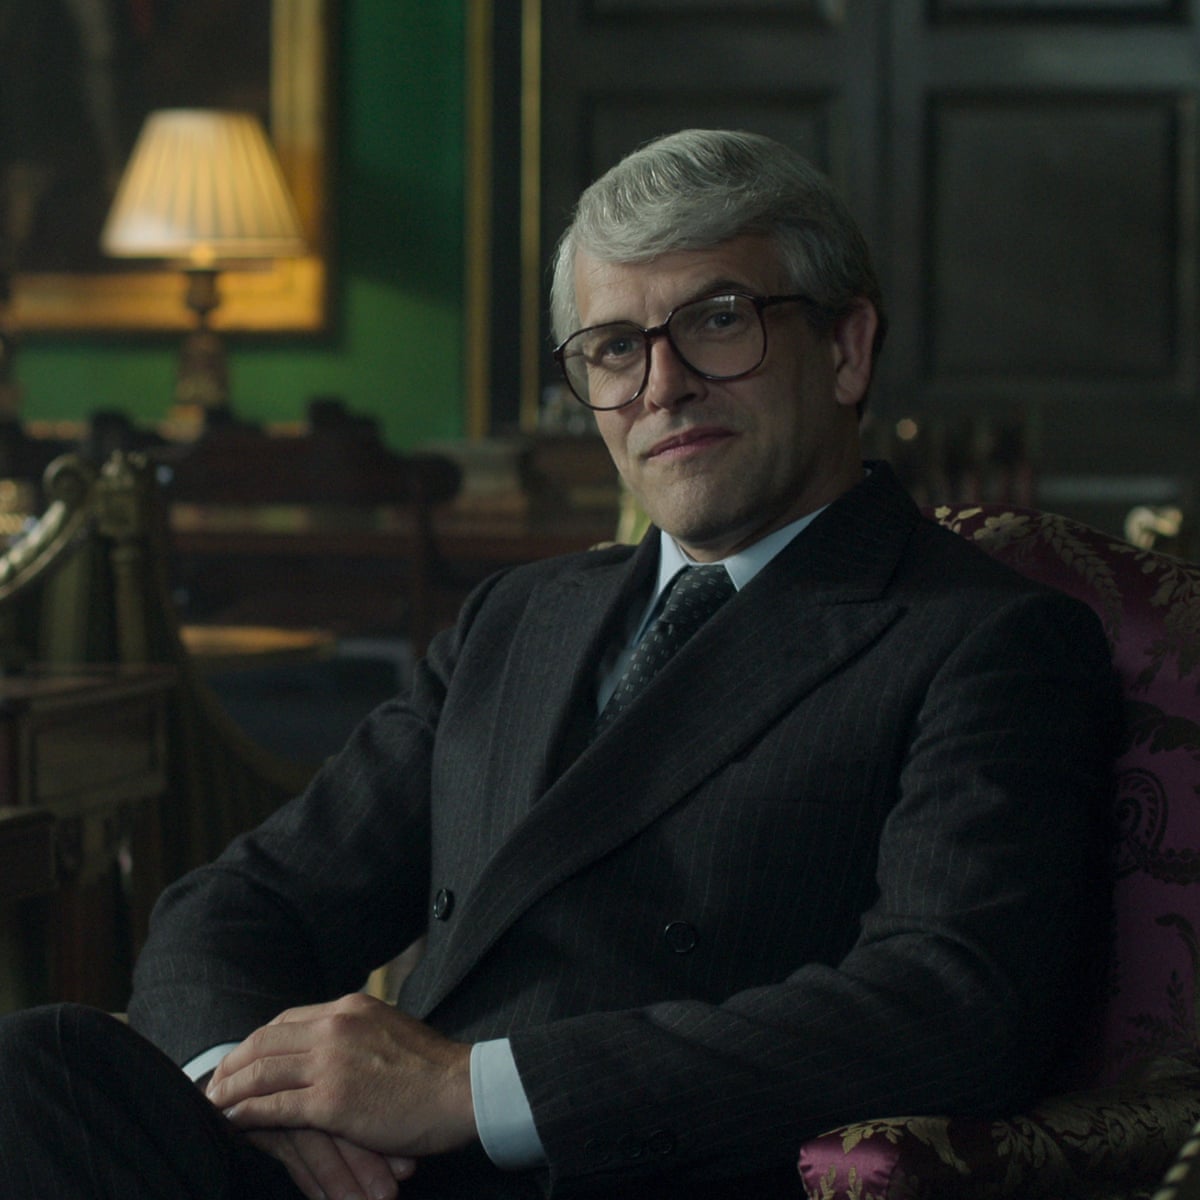 Jonny Lee Miller becomes John Major in pictures released from The Crown |  The Crown | The Guardian